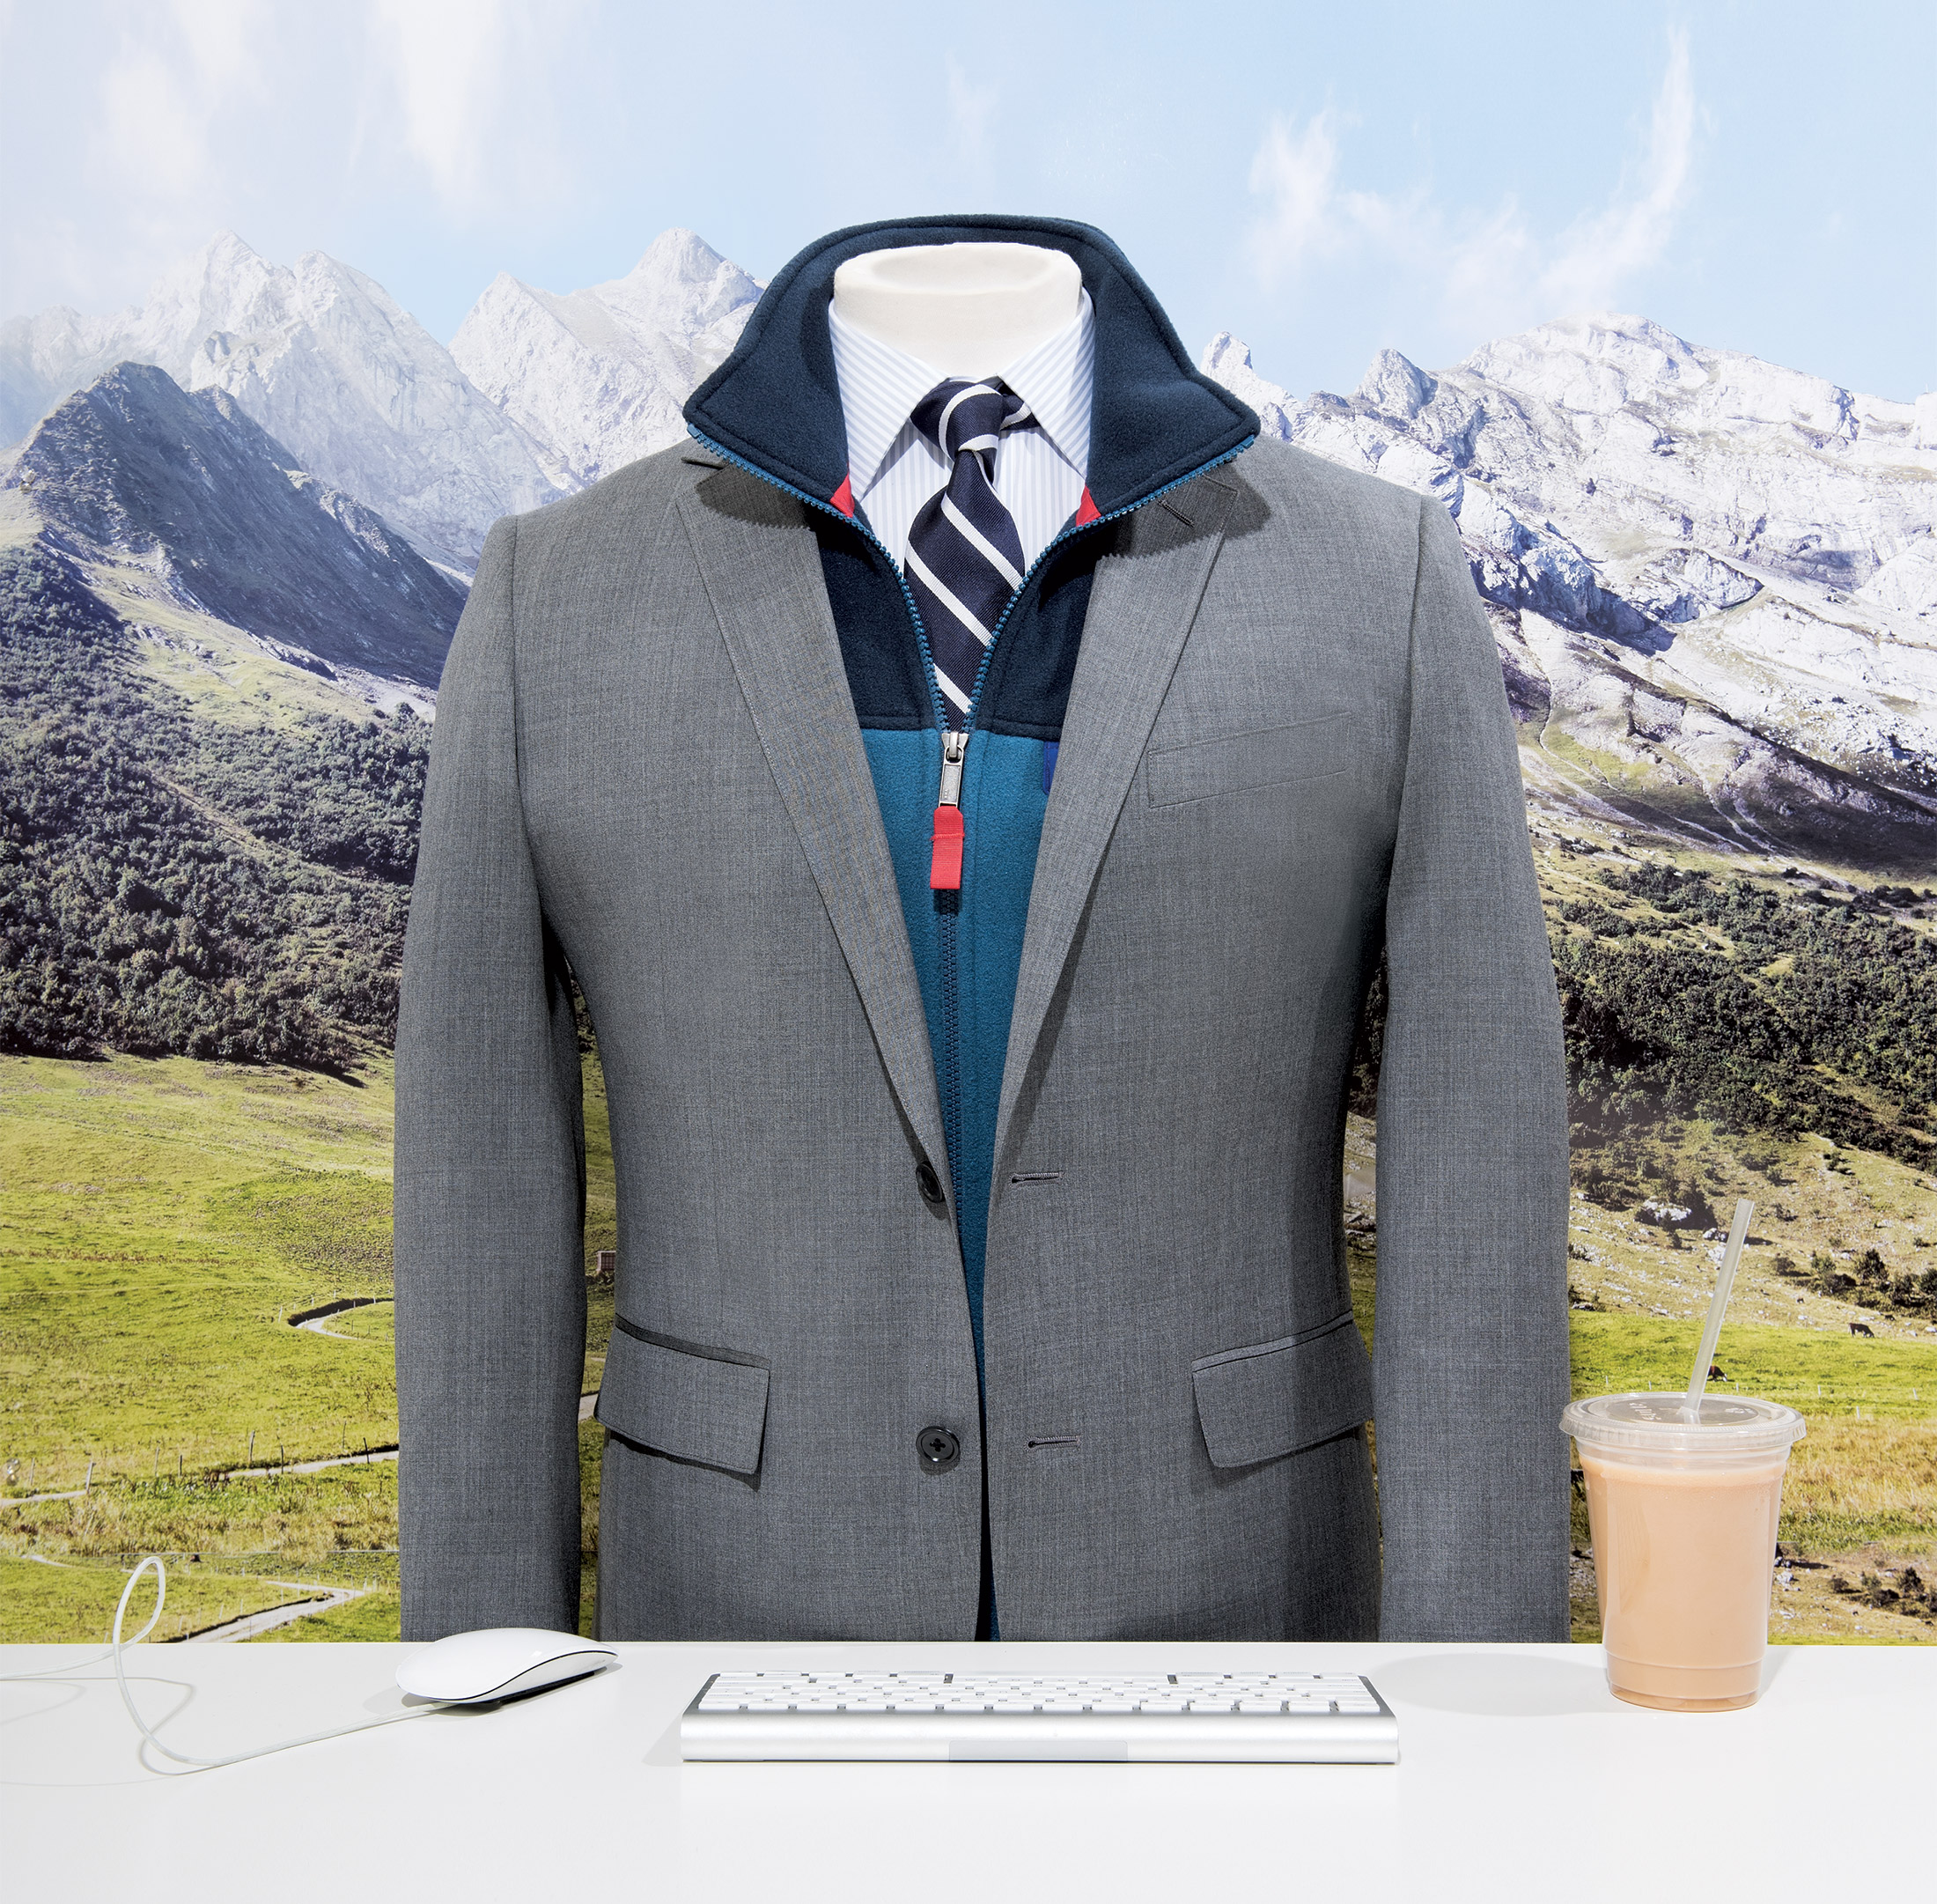 Fashion: How to Wear Fleece at the Office - Bloomberg